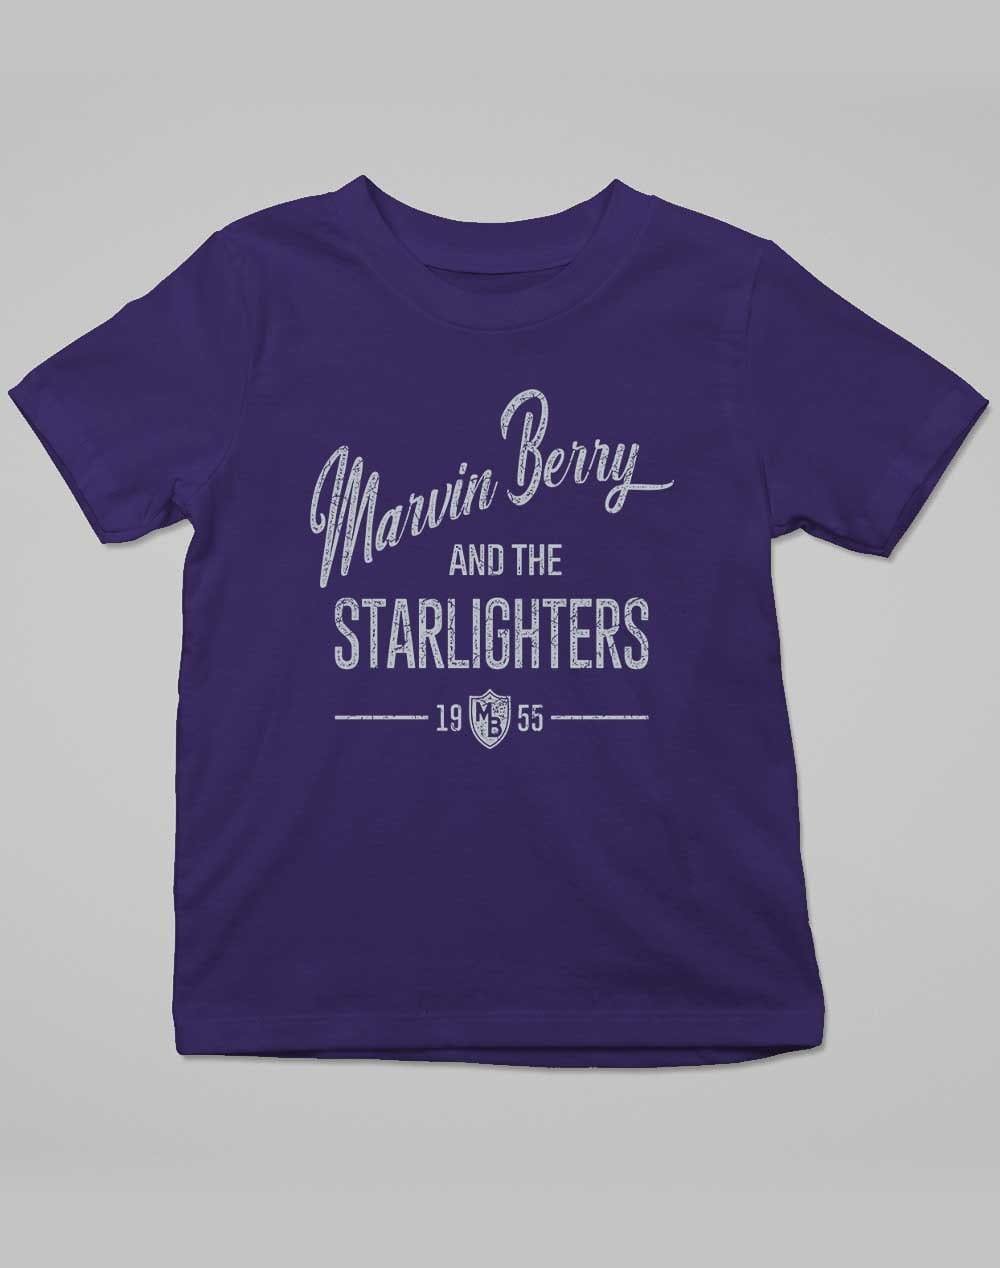 Marvin Berry and the Starlighters Kids T-Shirt 3-4 years / Navy  - Off World Tees